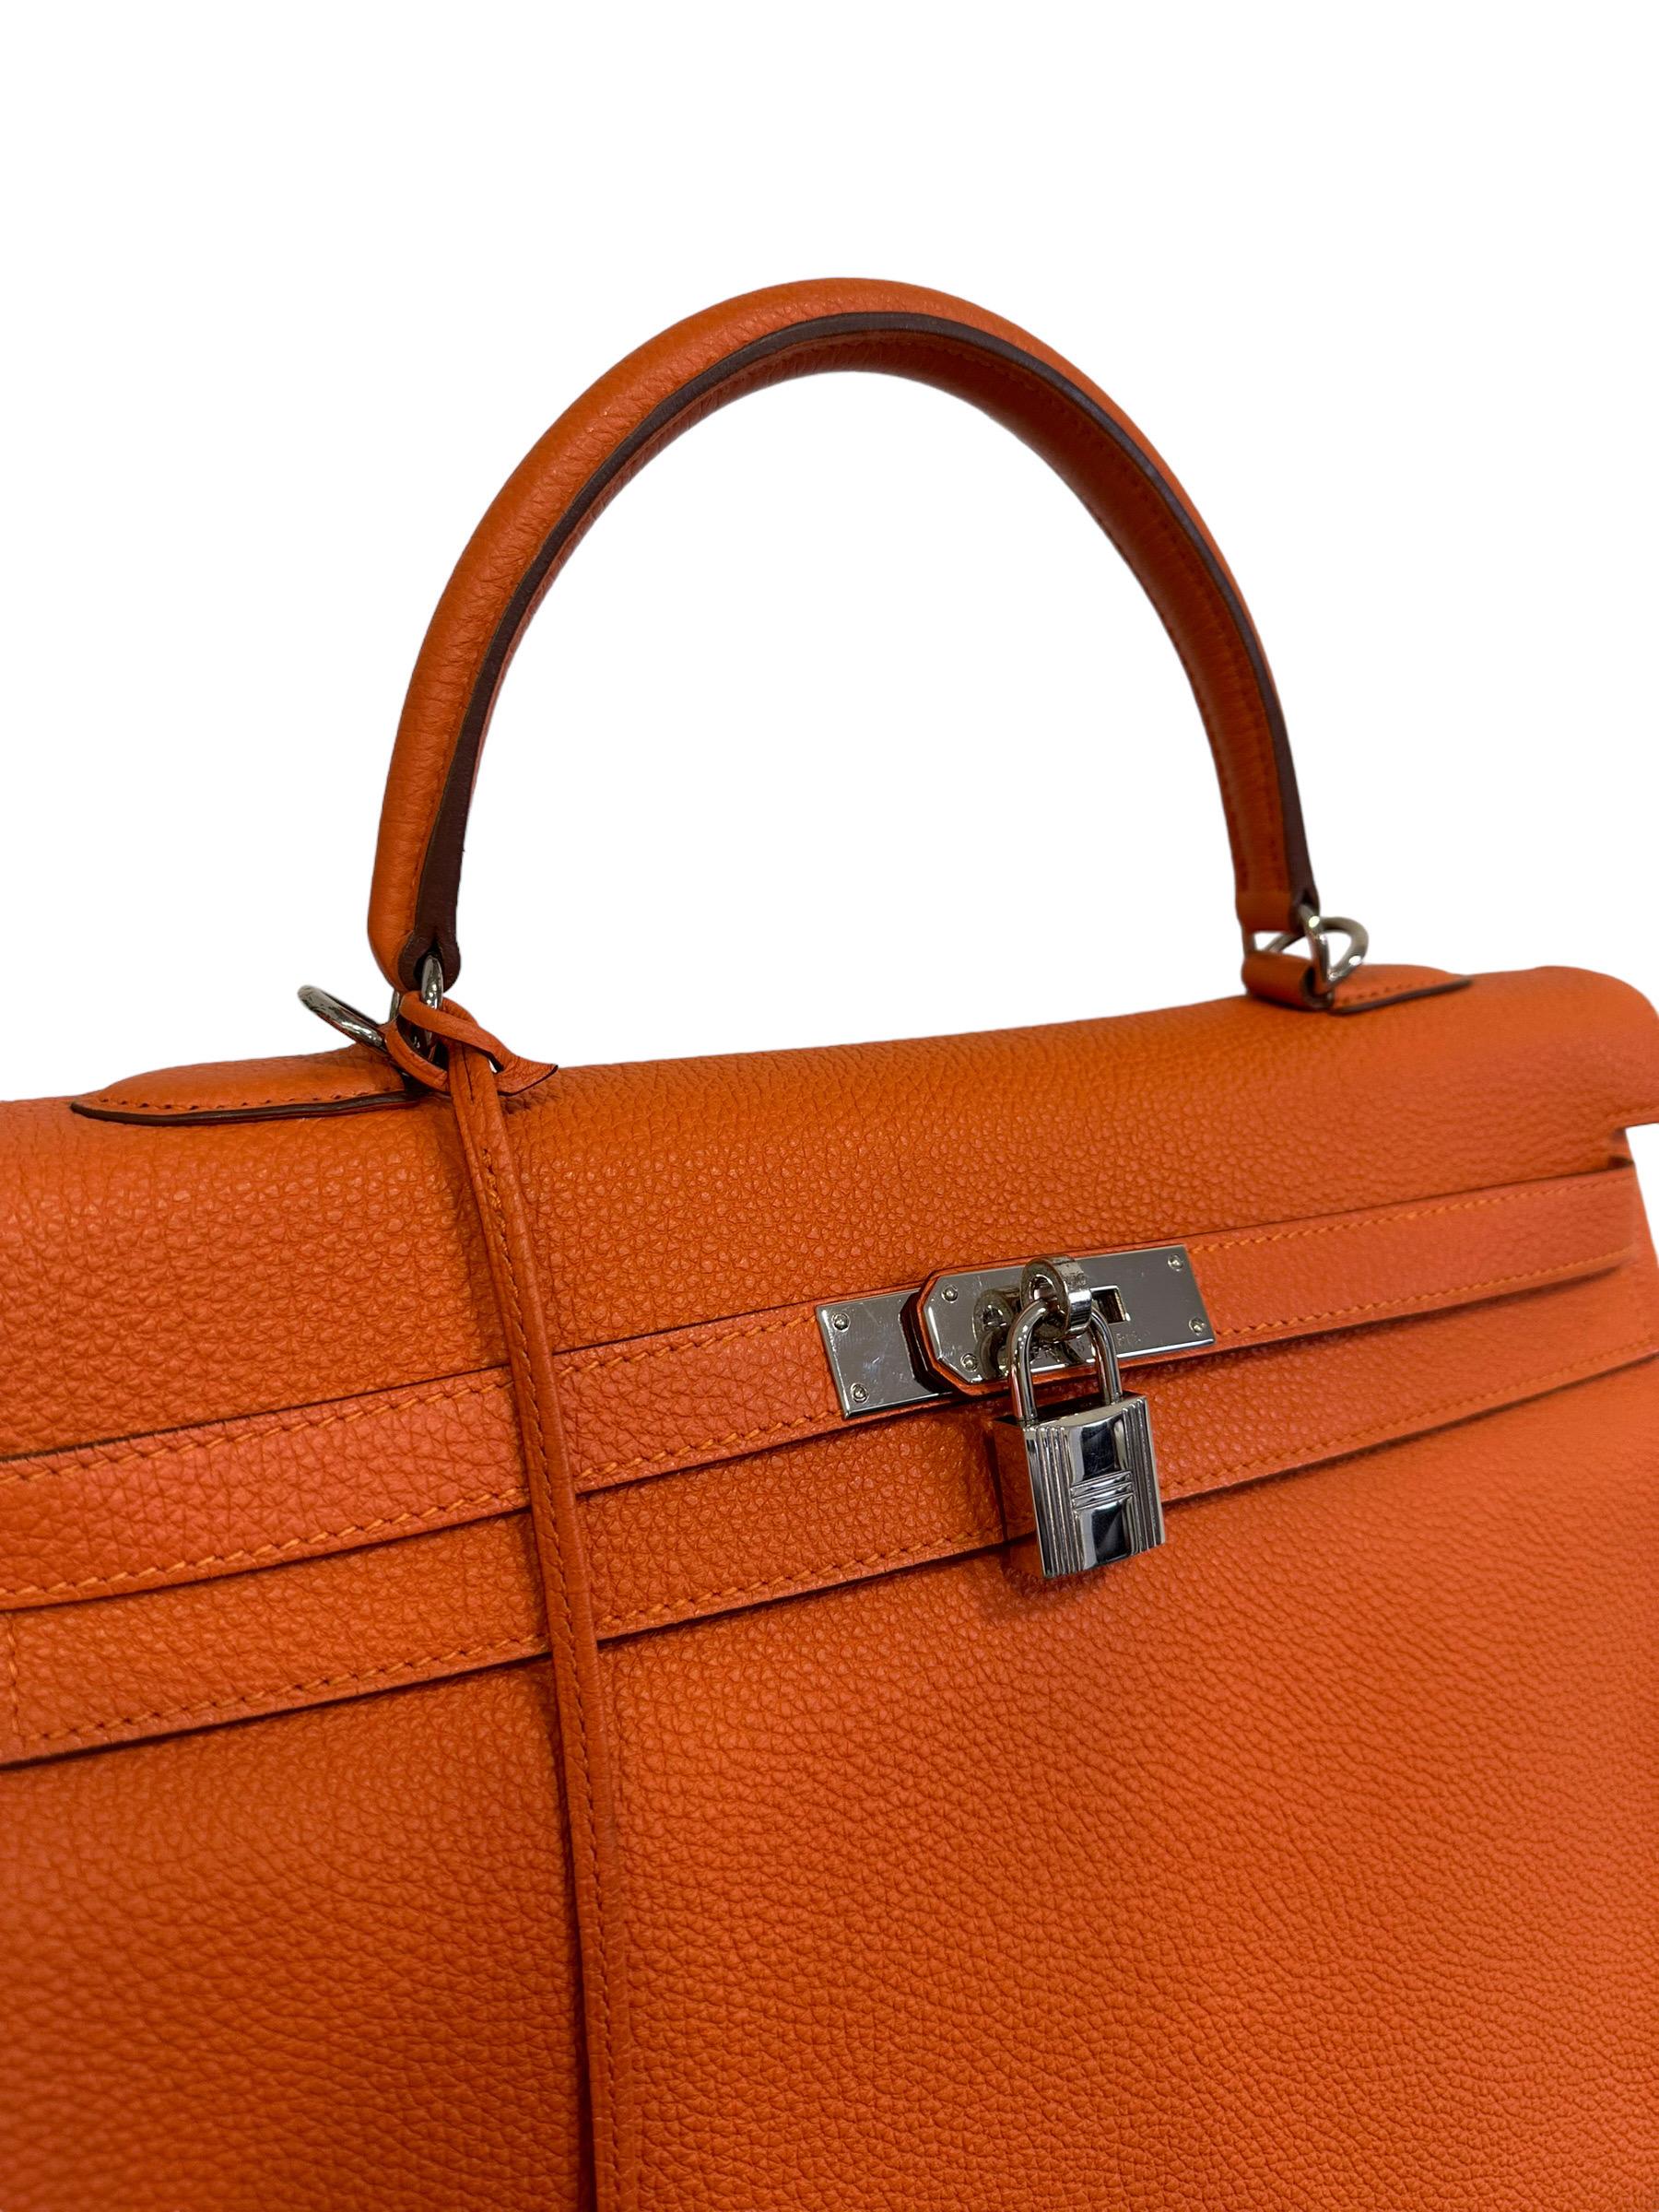 Hermès bag, Kelly model, size 35, made of orange fjord leather with silver hardware. Equipped with a front flap with Hermès twist lock, padlock and keys. Internally lined in smooth orange leather, complete with three pockets including one with zip